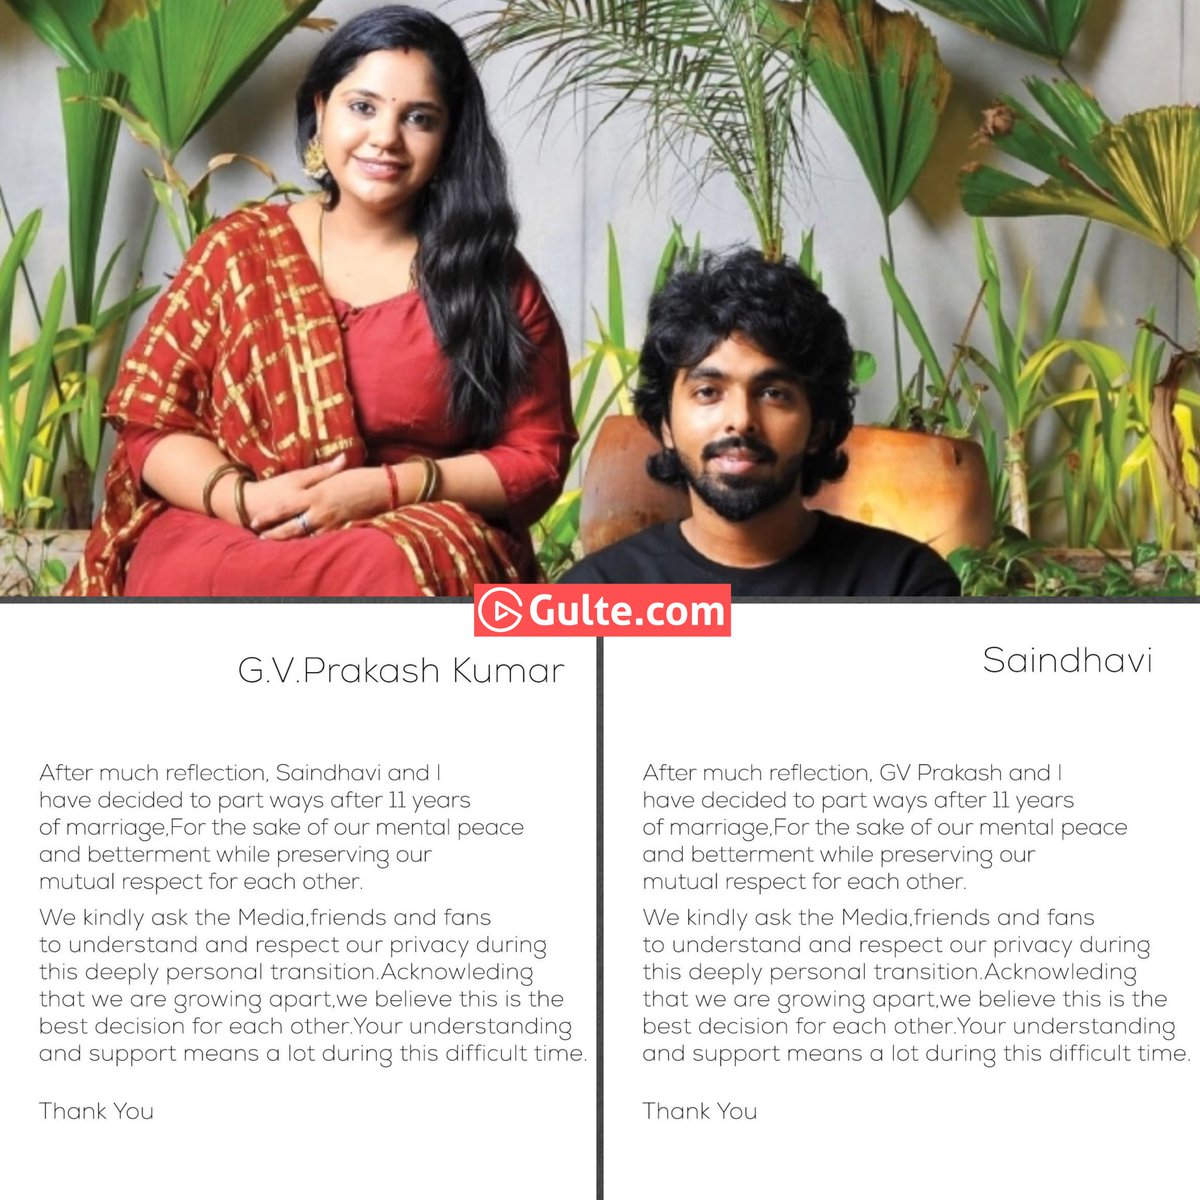 #GVPrakash and Singer #Saindhavi have decided to part ways after 11 years of marriage.

They have a 4-year-old child, 'Anvi'.